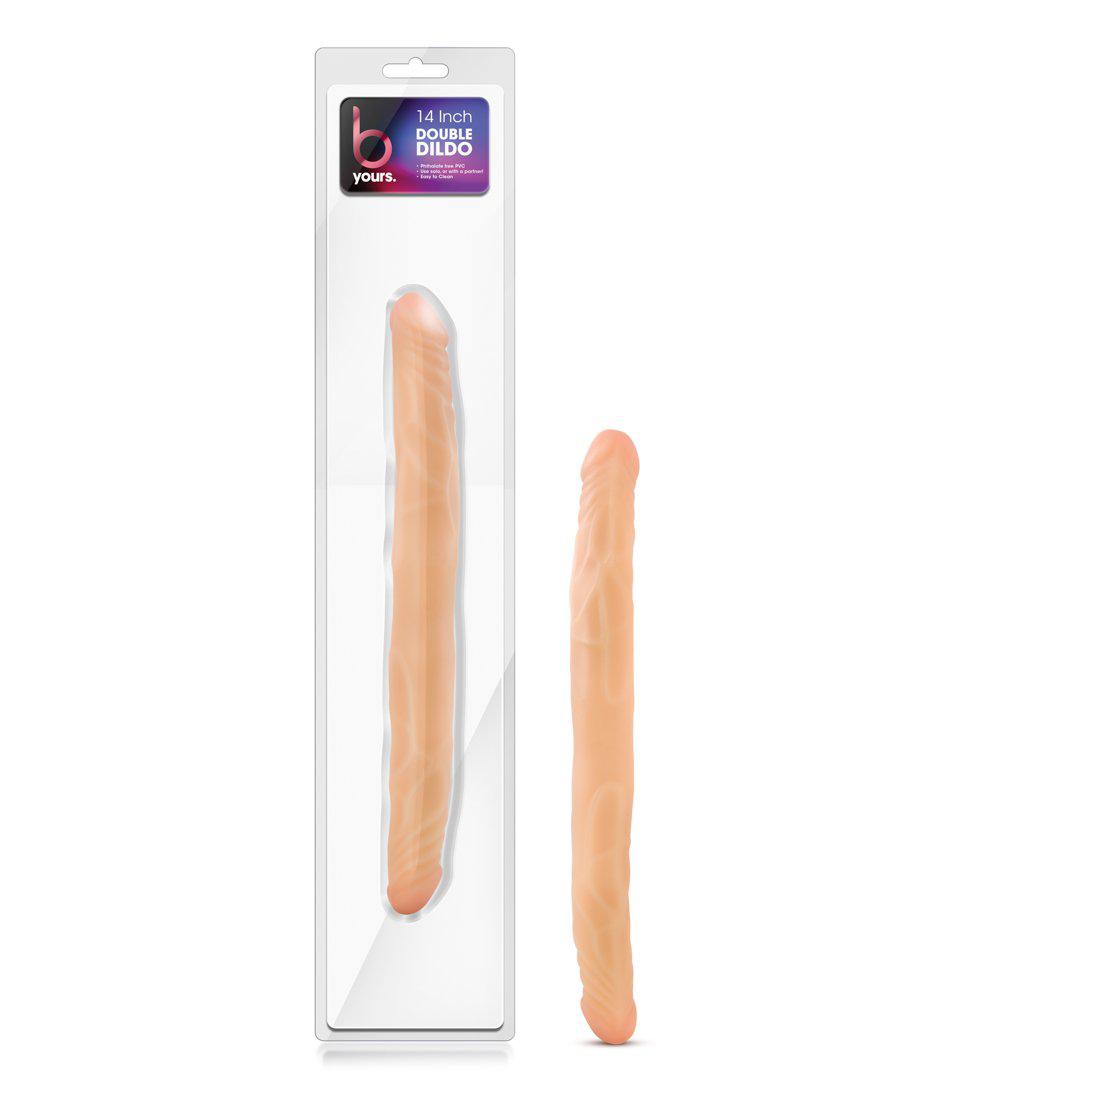 B Yours 14 Inch Double Dildo - Beige